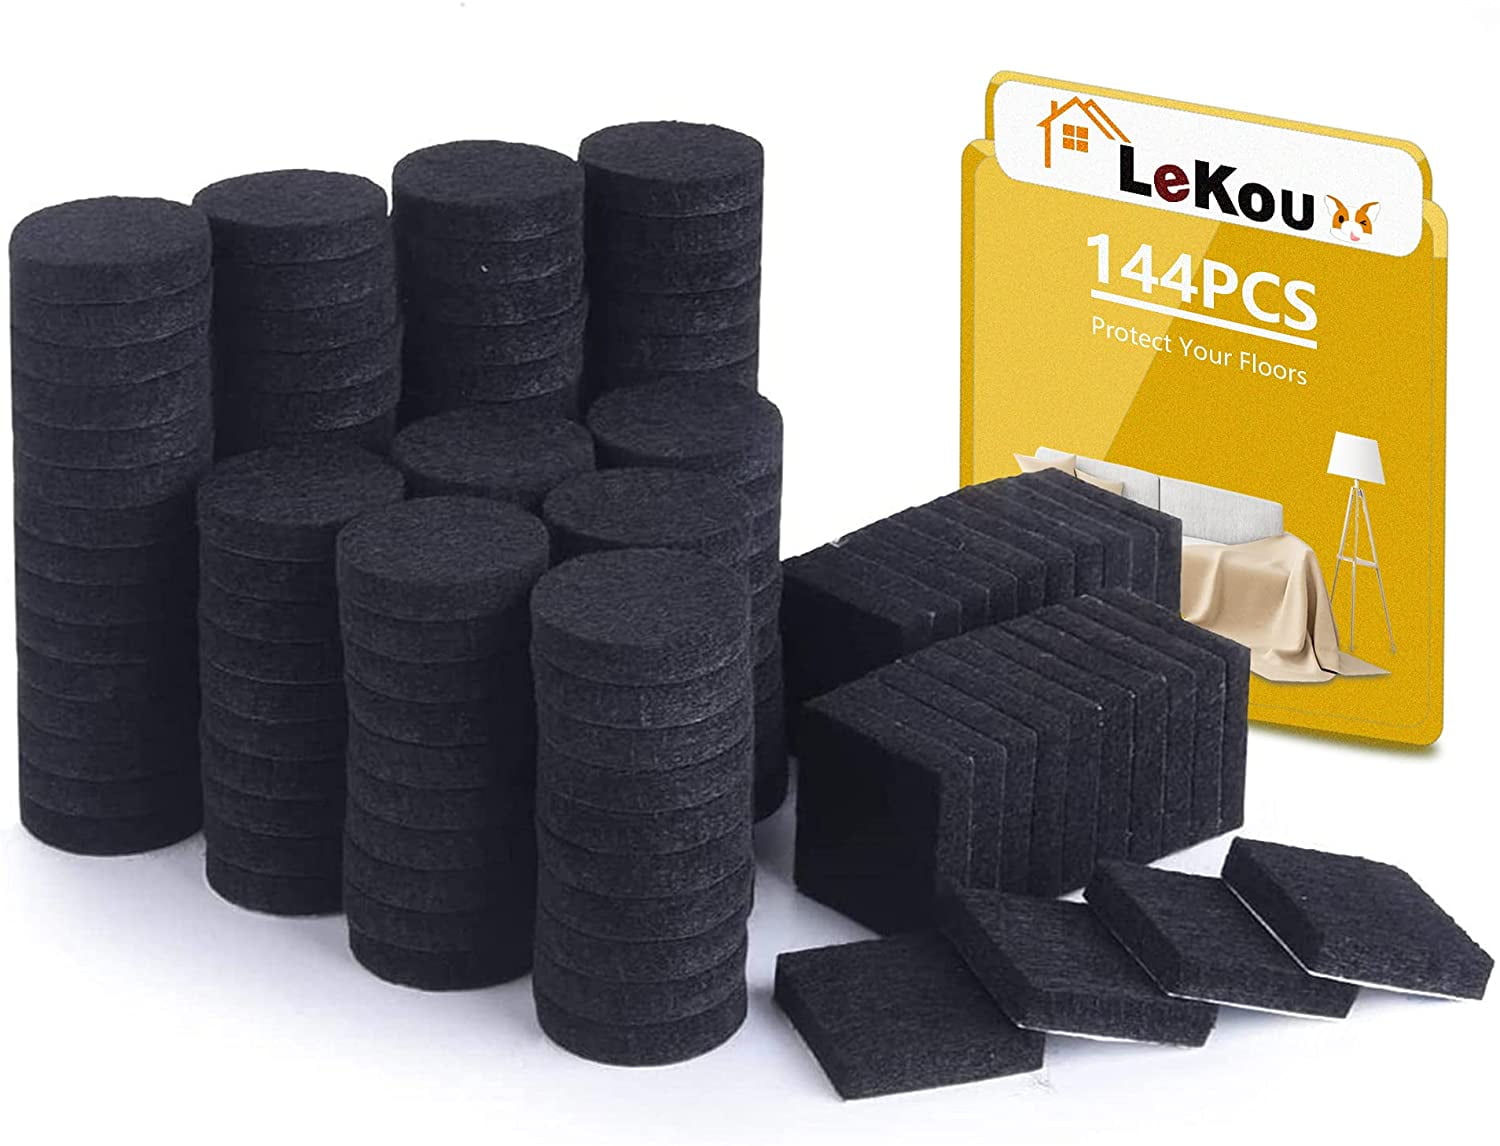 Lekou 1 Felt Furniture Pads 144 Pieces, Round and Square Black  Self-Adhesive Anti-Slip Foot pads , Suitable for Various Homes on Wood  Floors and Tiles 